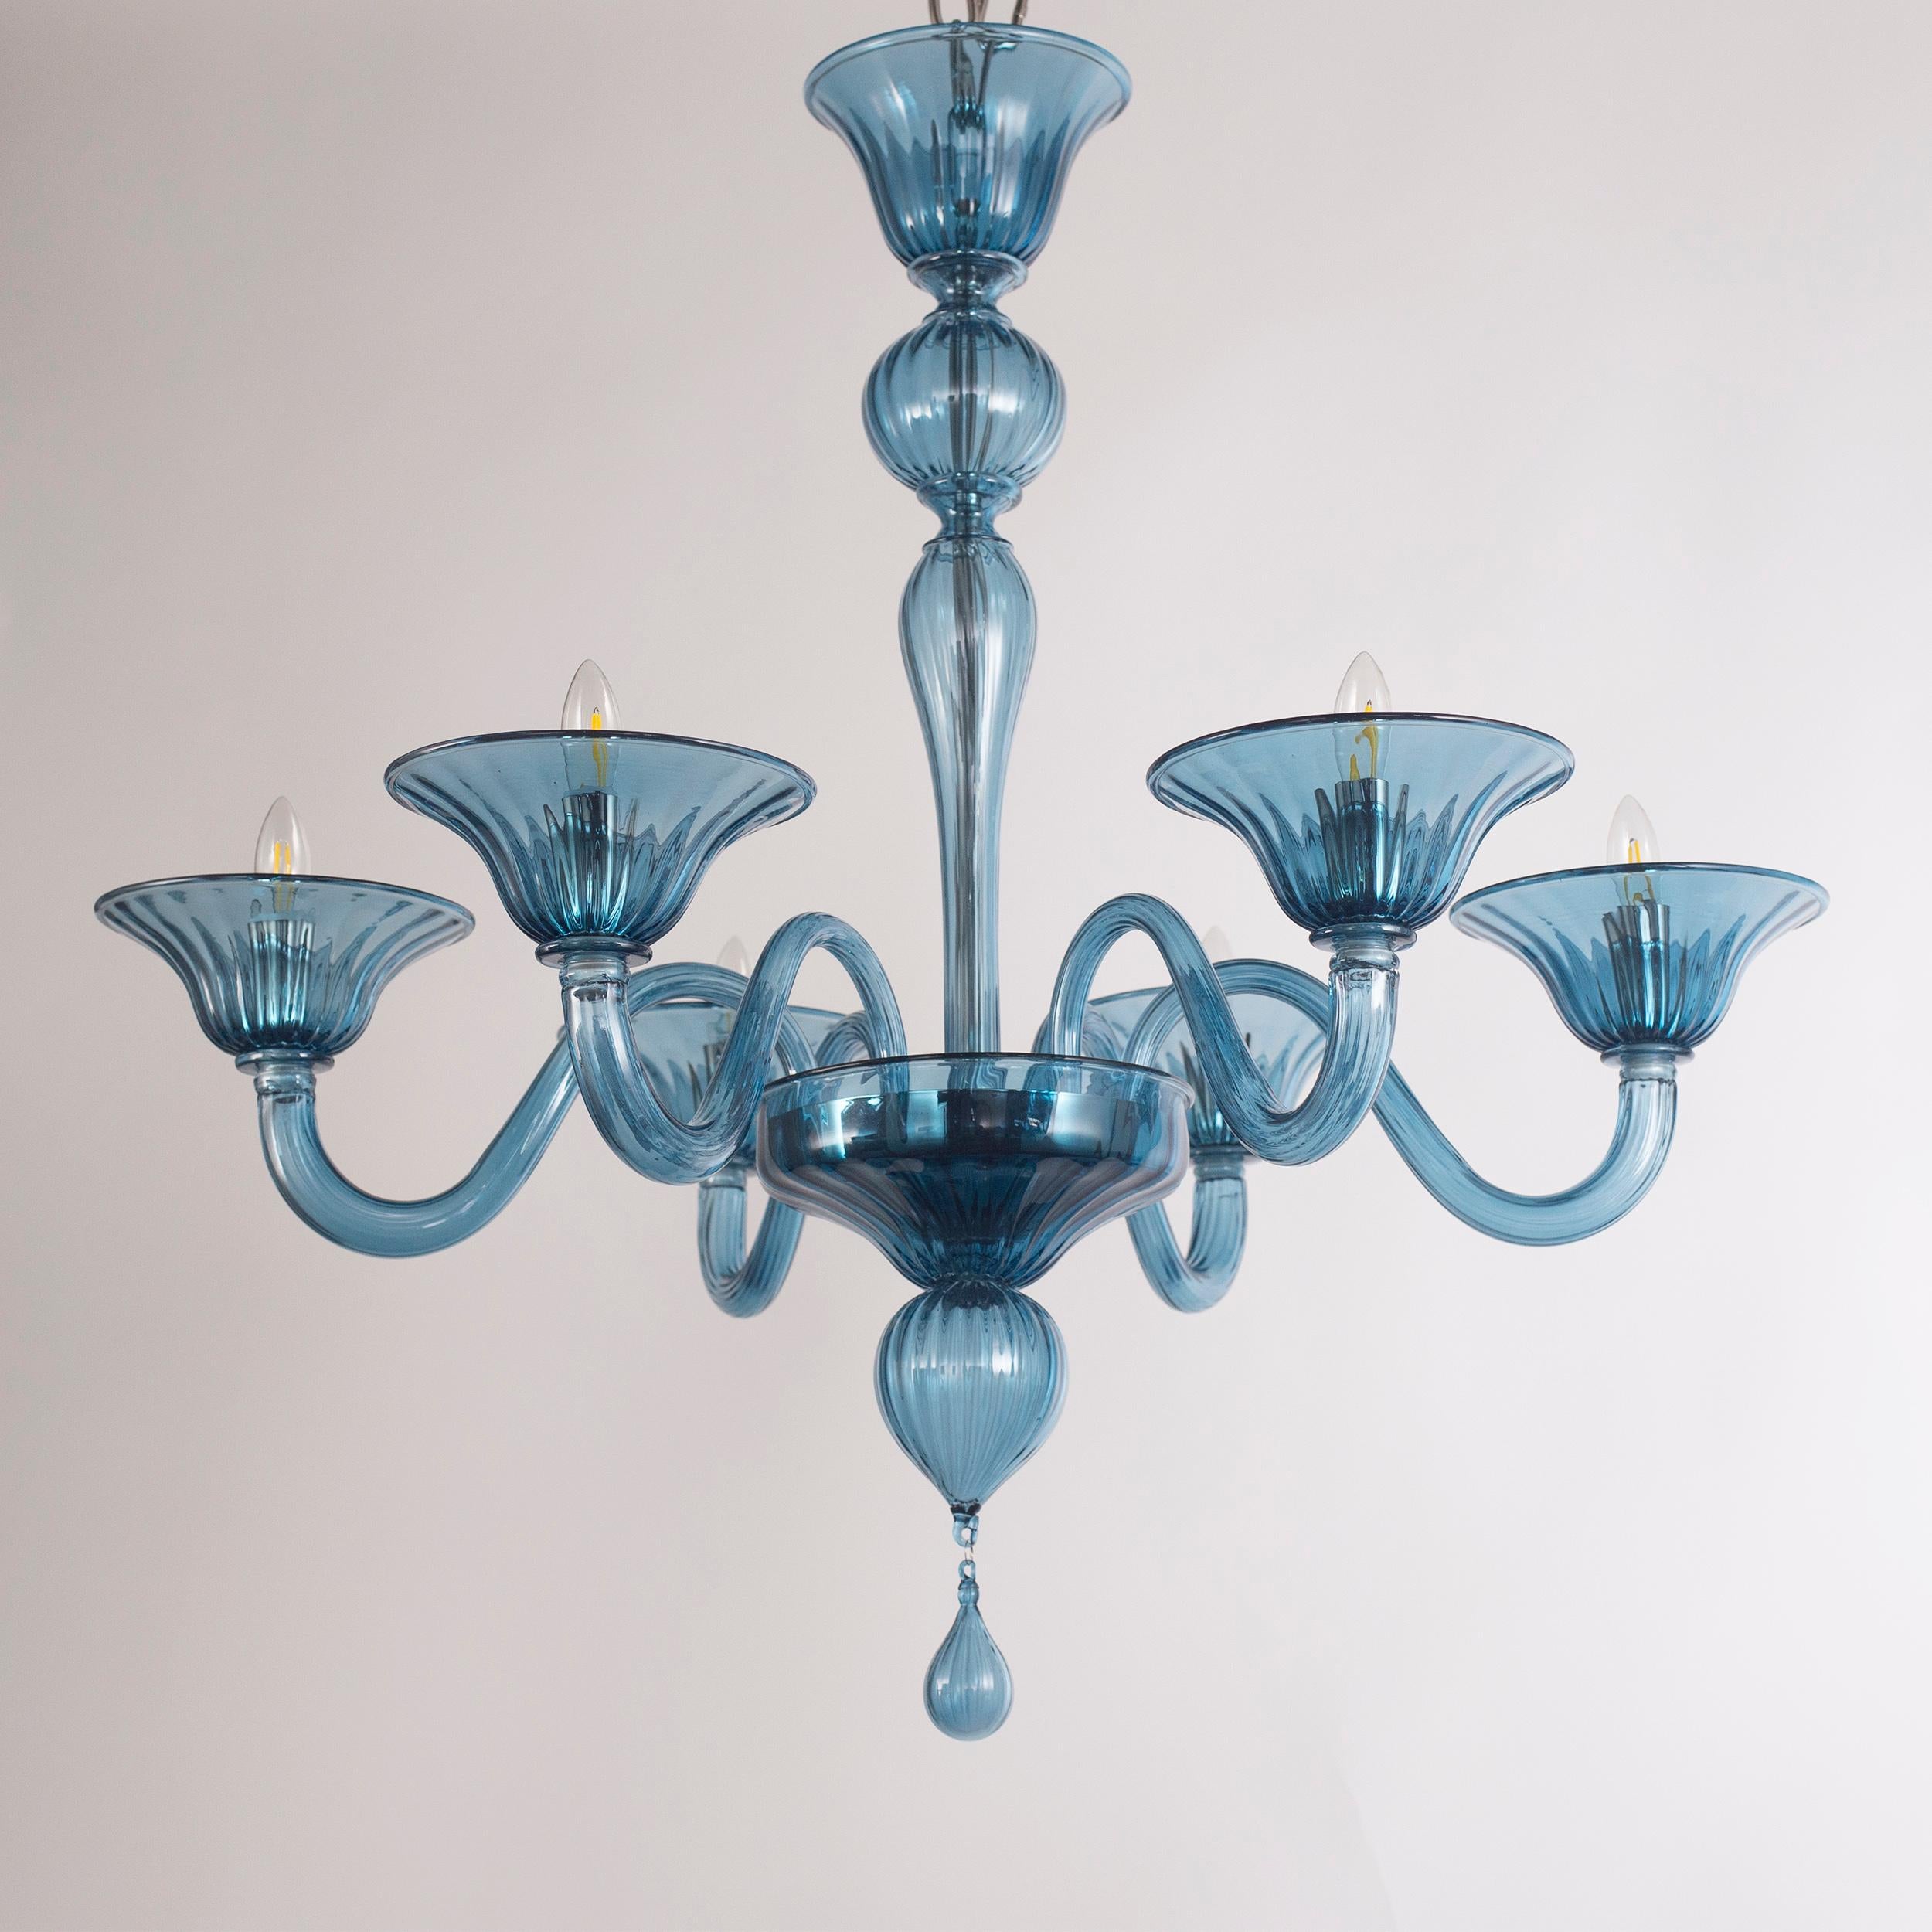 Simplicissimus 360 chandelier, 6 lights, Teal Blue artistic glass by Multiforme
This collection in Murano glass is characterized by superb simplicity. It is the result of a research which harks back to the Classic Murano chandeliers with the purpose